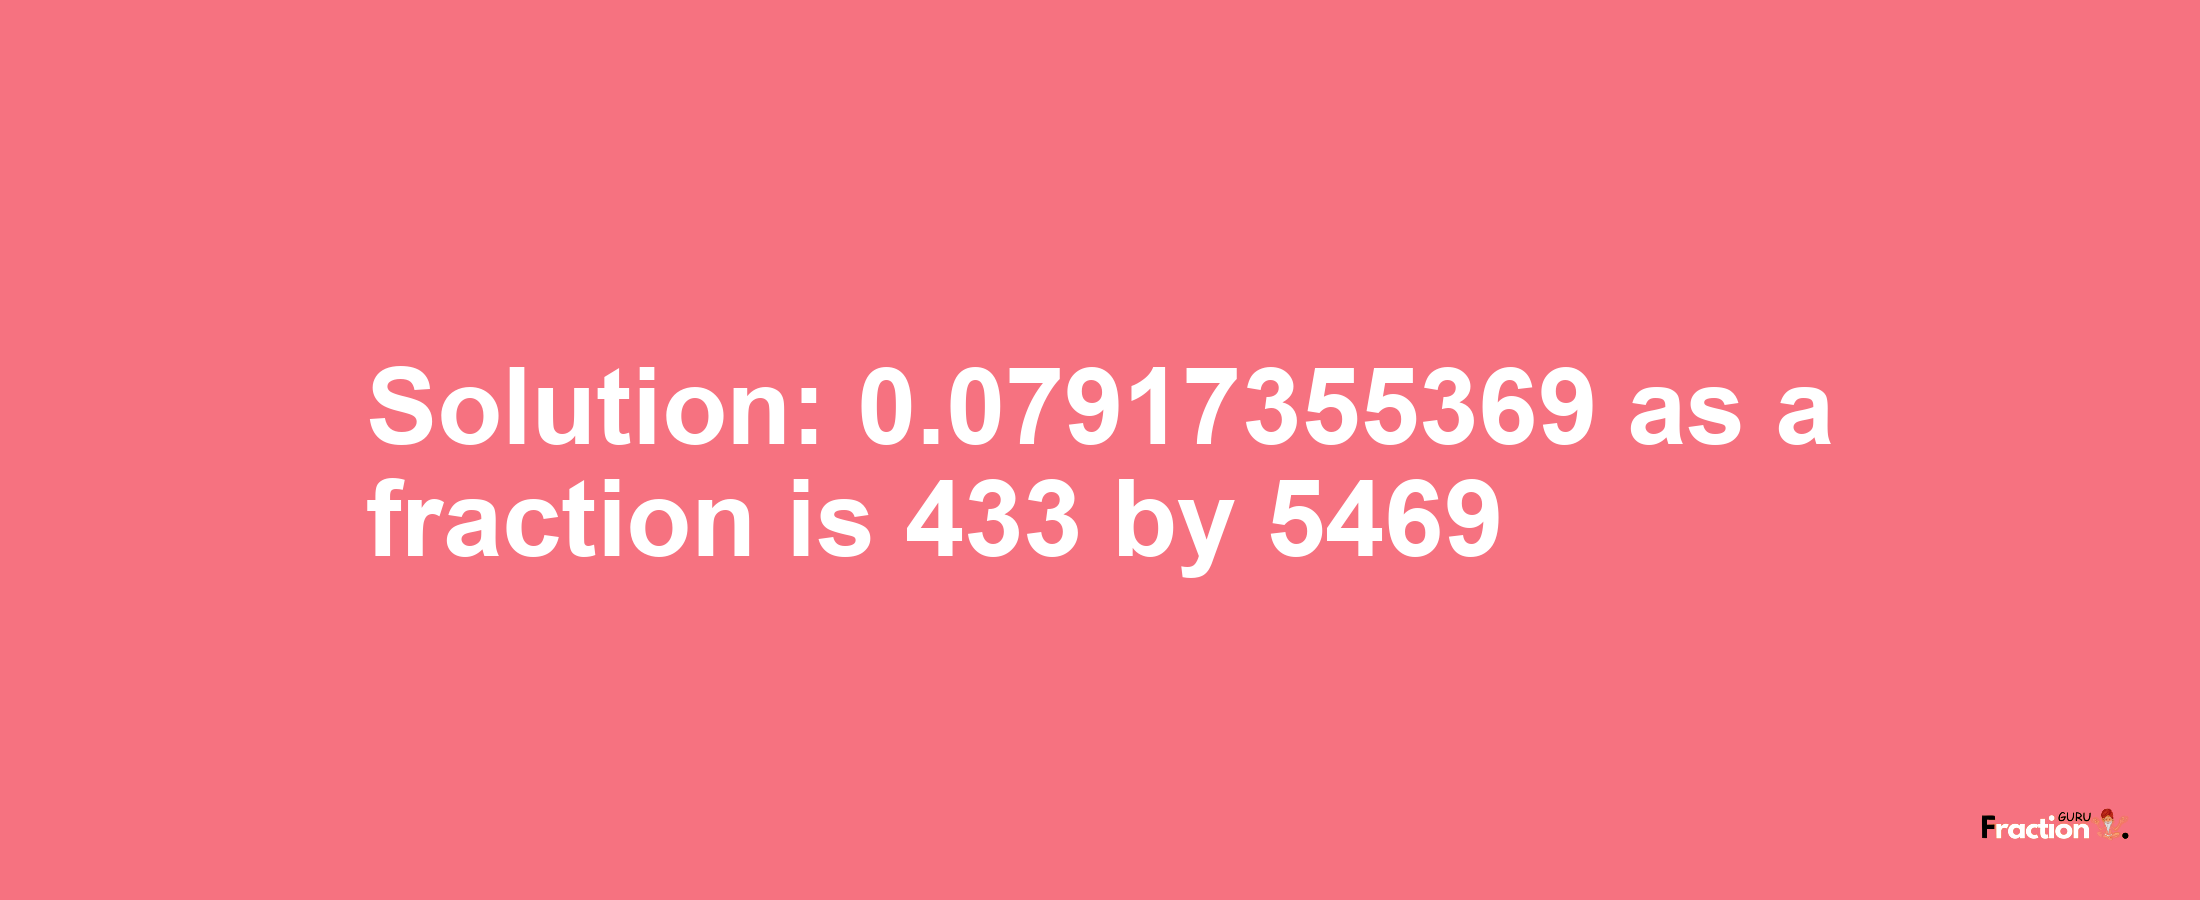 Solution:0.07917355369 as a fraction is 433/5469